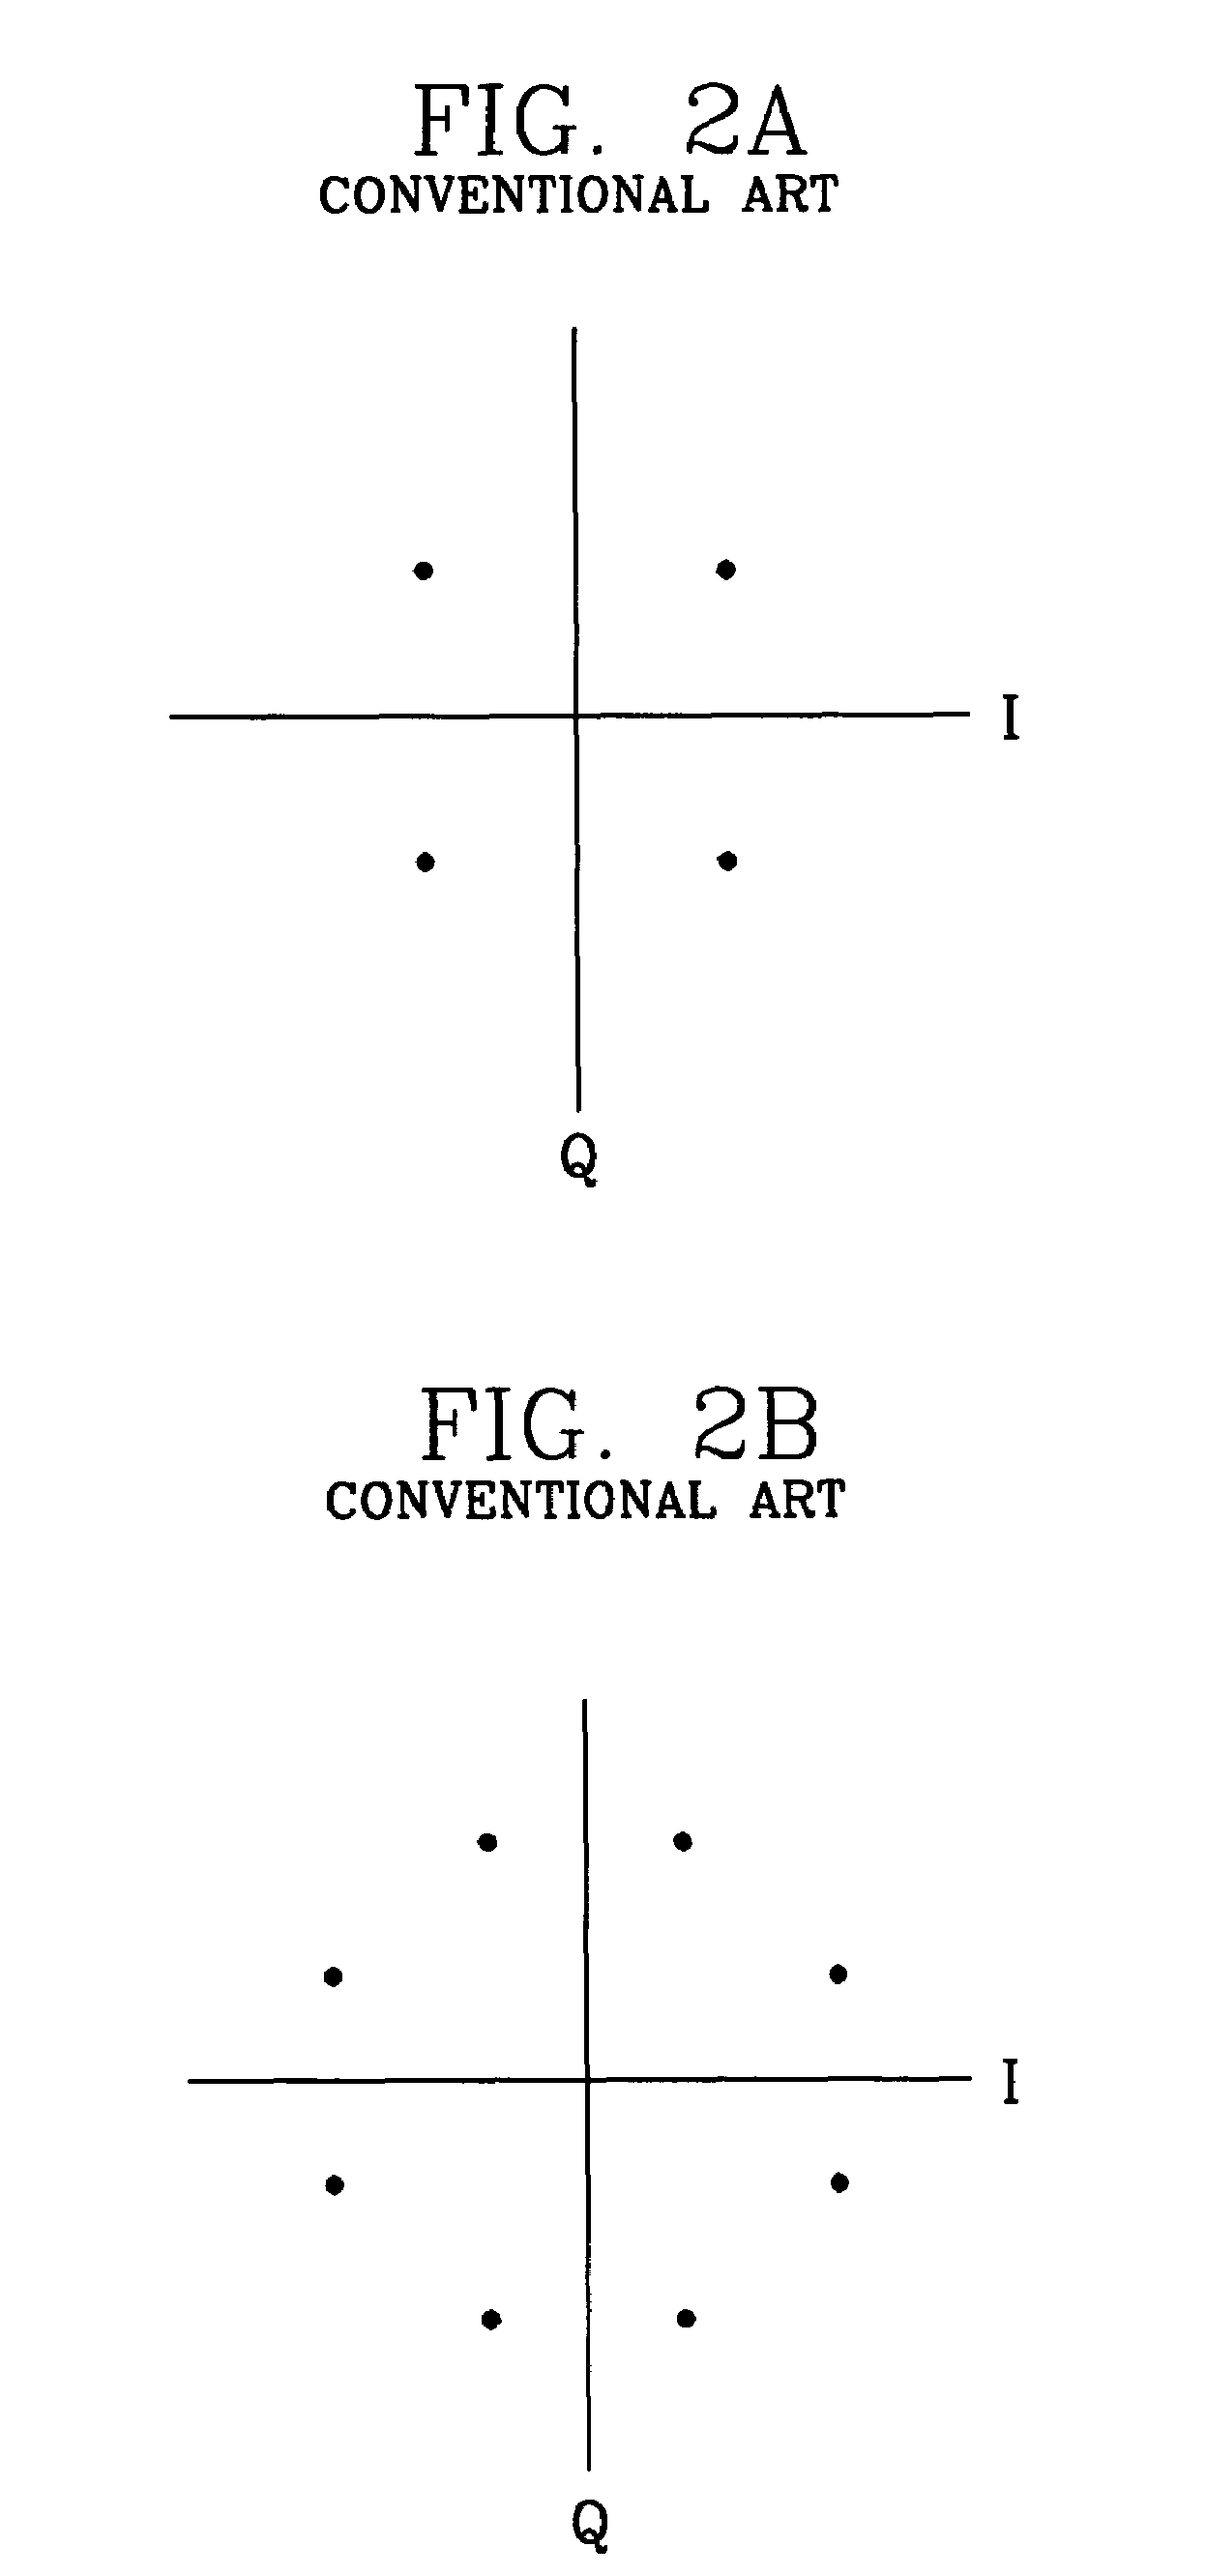 Receiving apparatus and method of high speed digital data communication system